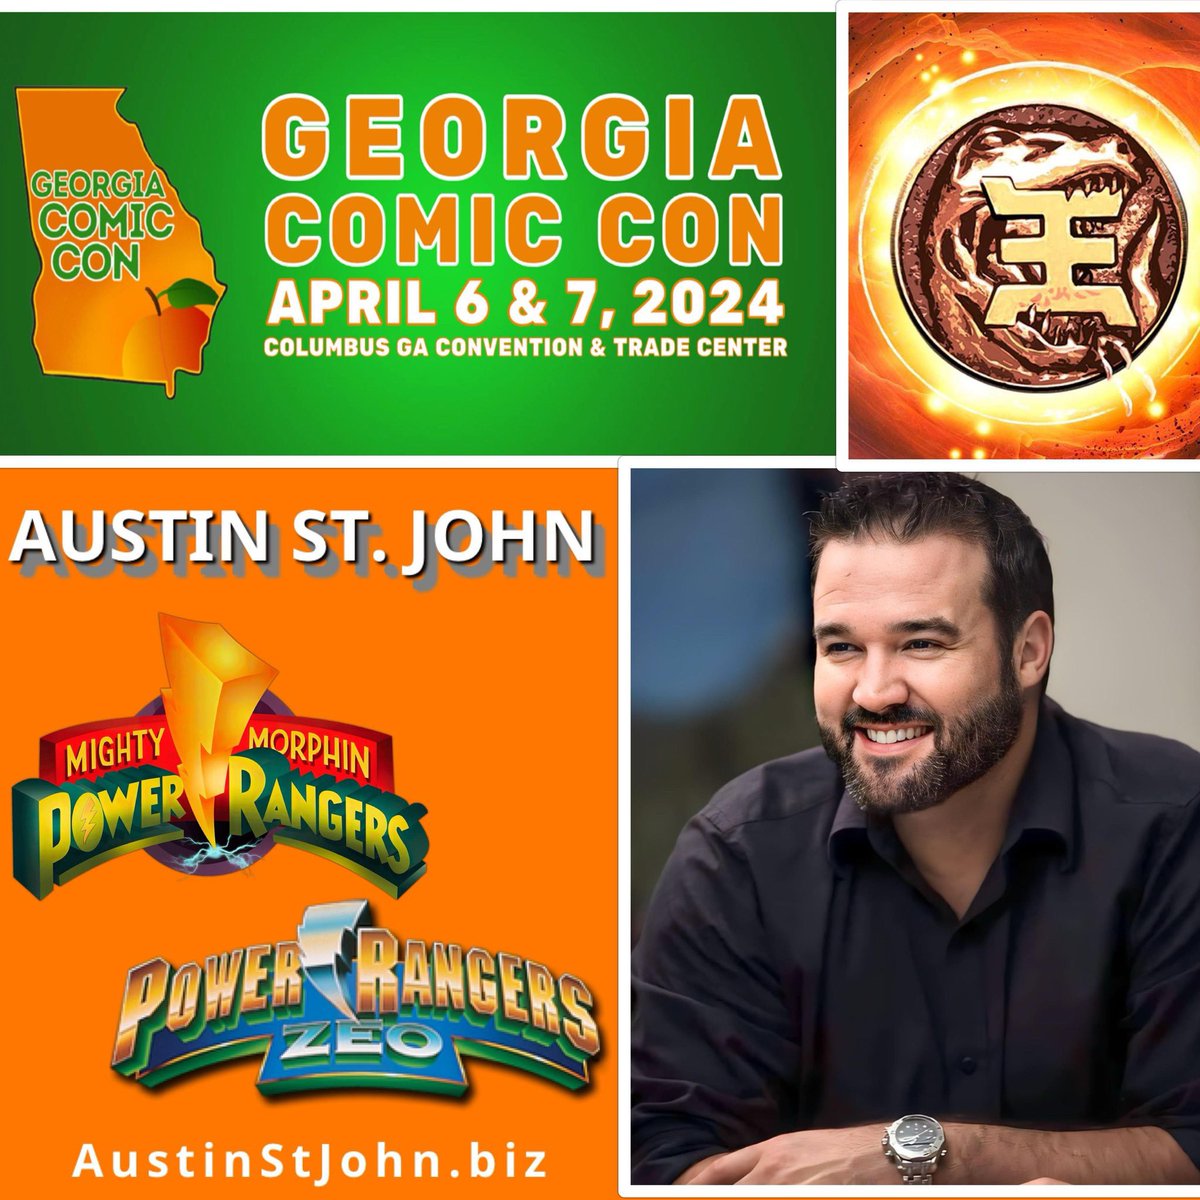 Starting tomorrow join me at Georgia Comic Con at the Columbus GA Convention & Trade Center! I'll be there both days to take pictures, sign autographs and answer questions for YOU! See you soon! tixr.com/groups/vxveven… #powerrangers #mmpr #redempt1on #rangertoreaper